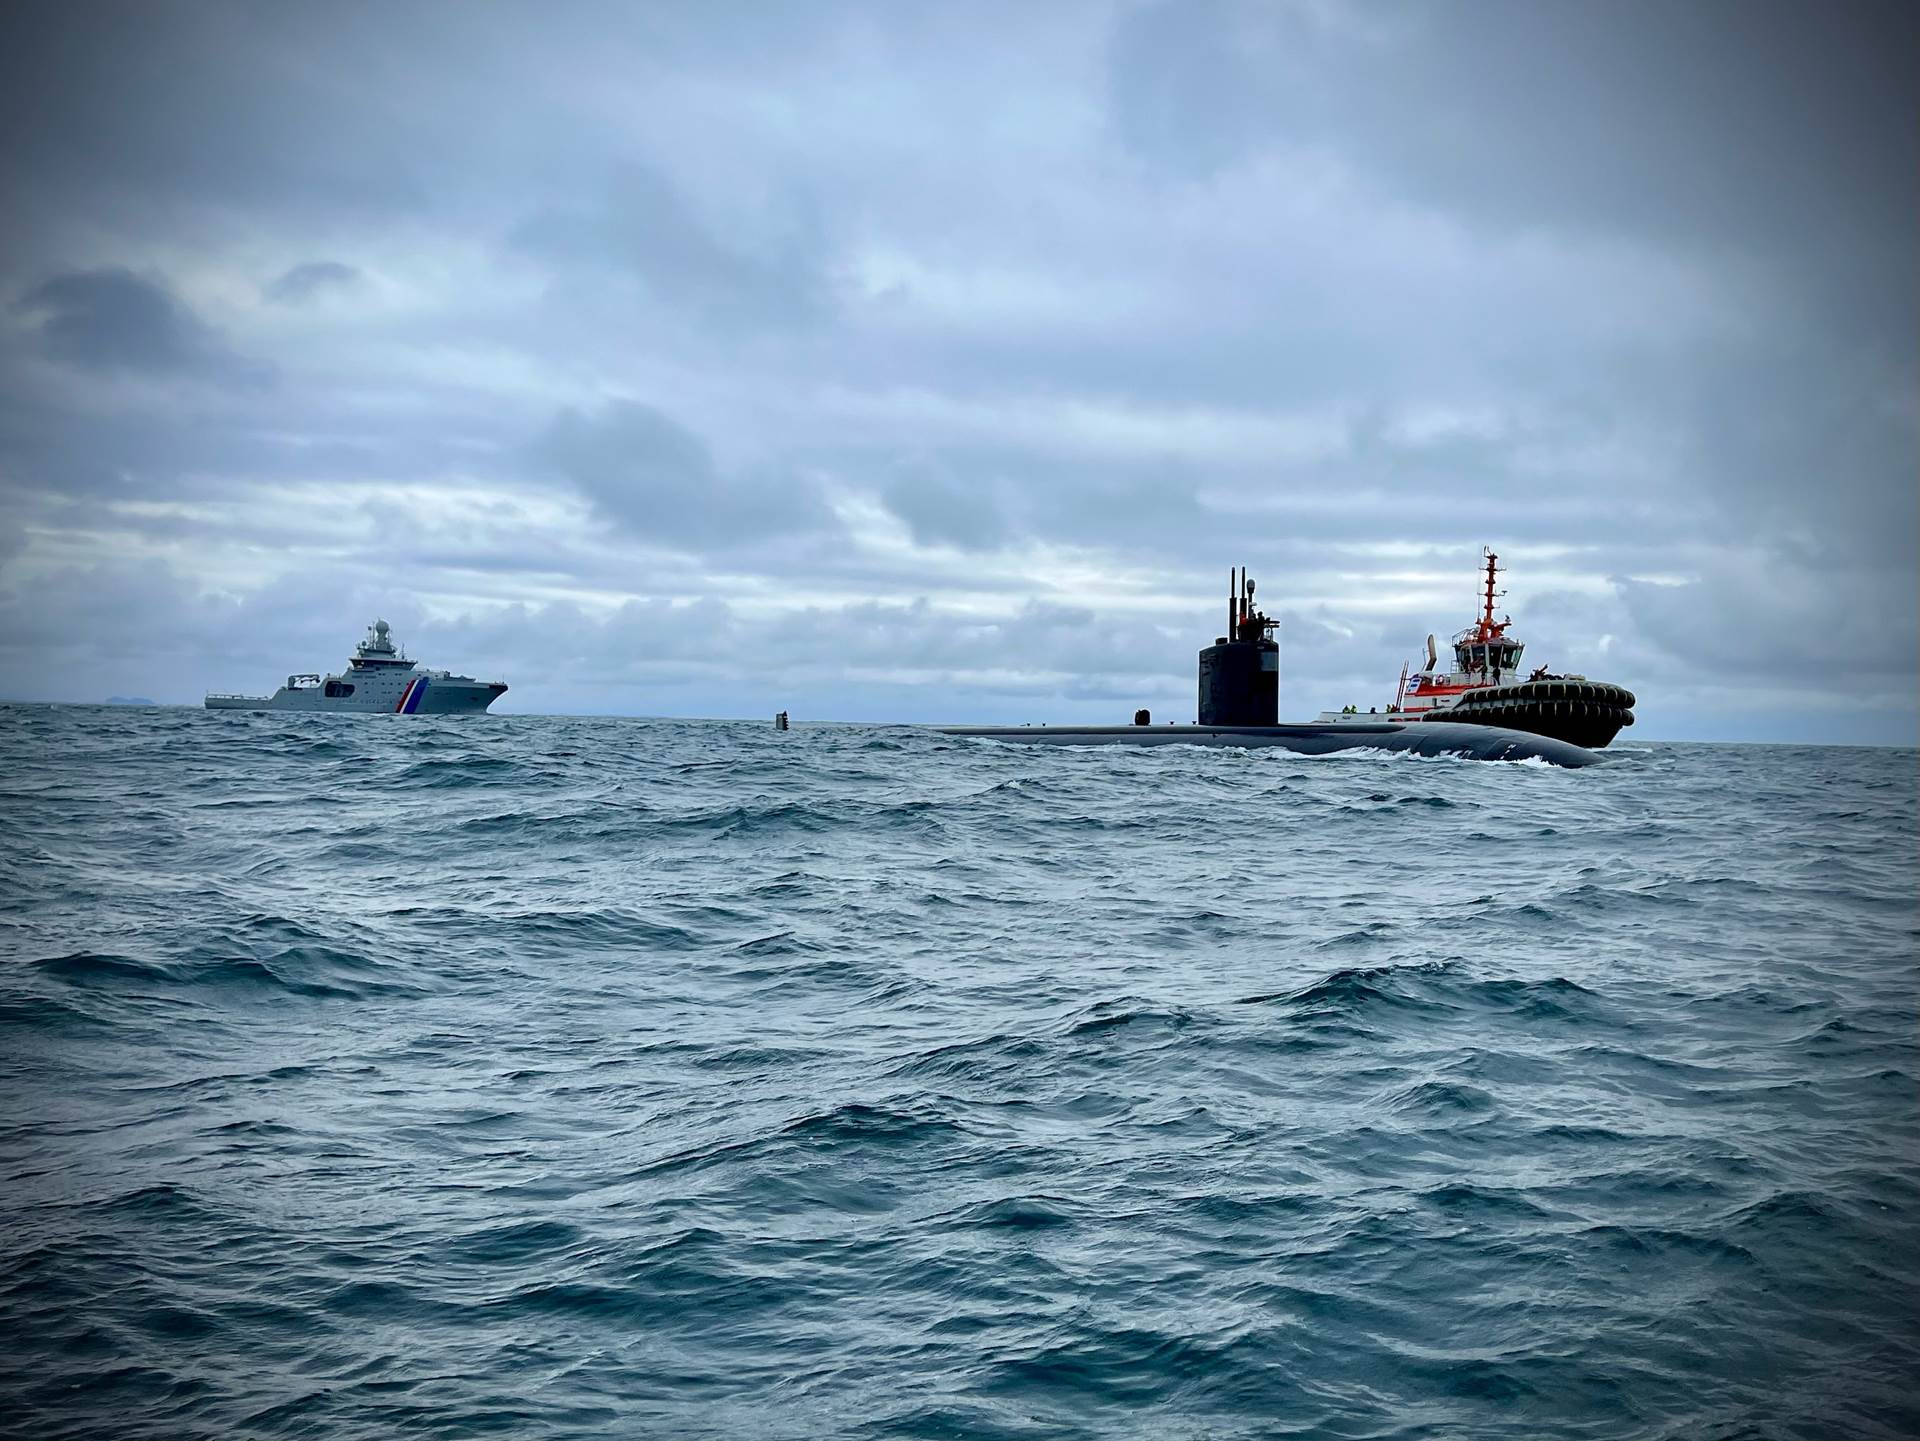 First service stop by a US Navy submarine in Icelandic territorial waters - mynd